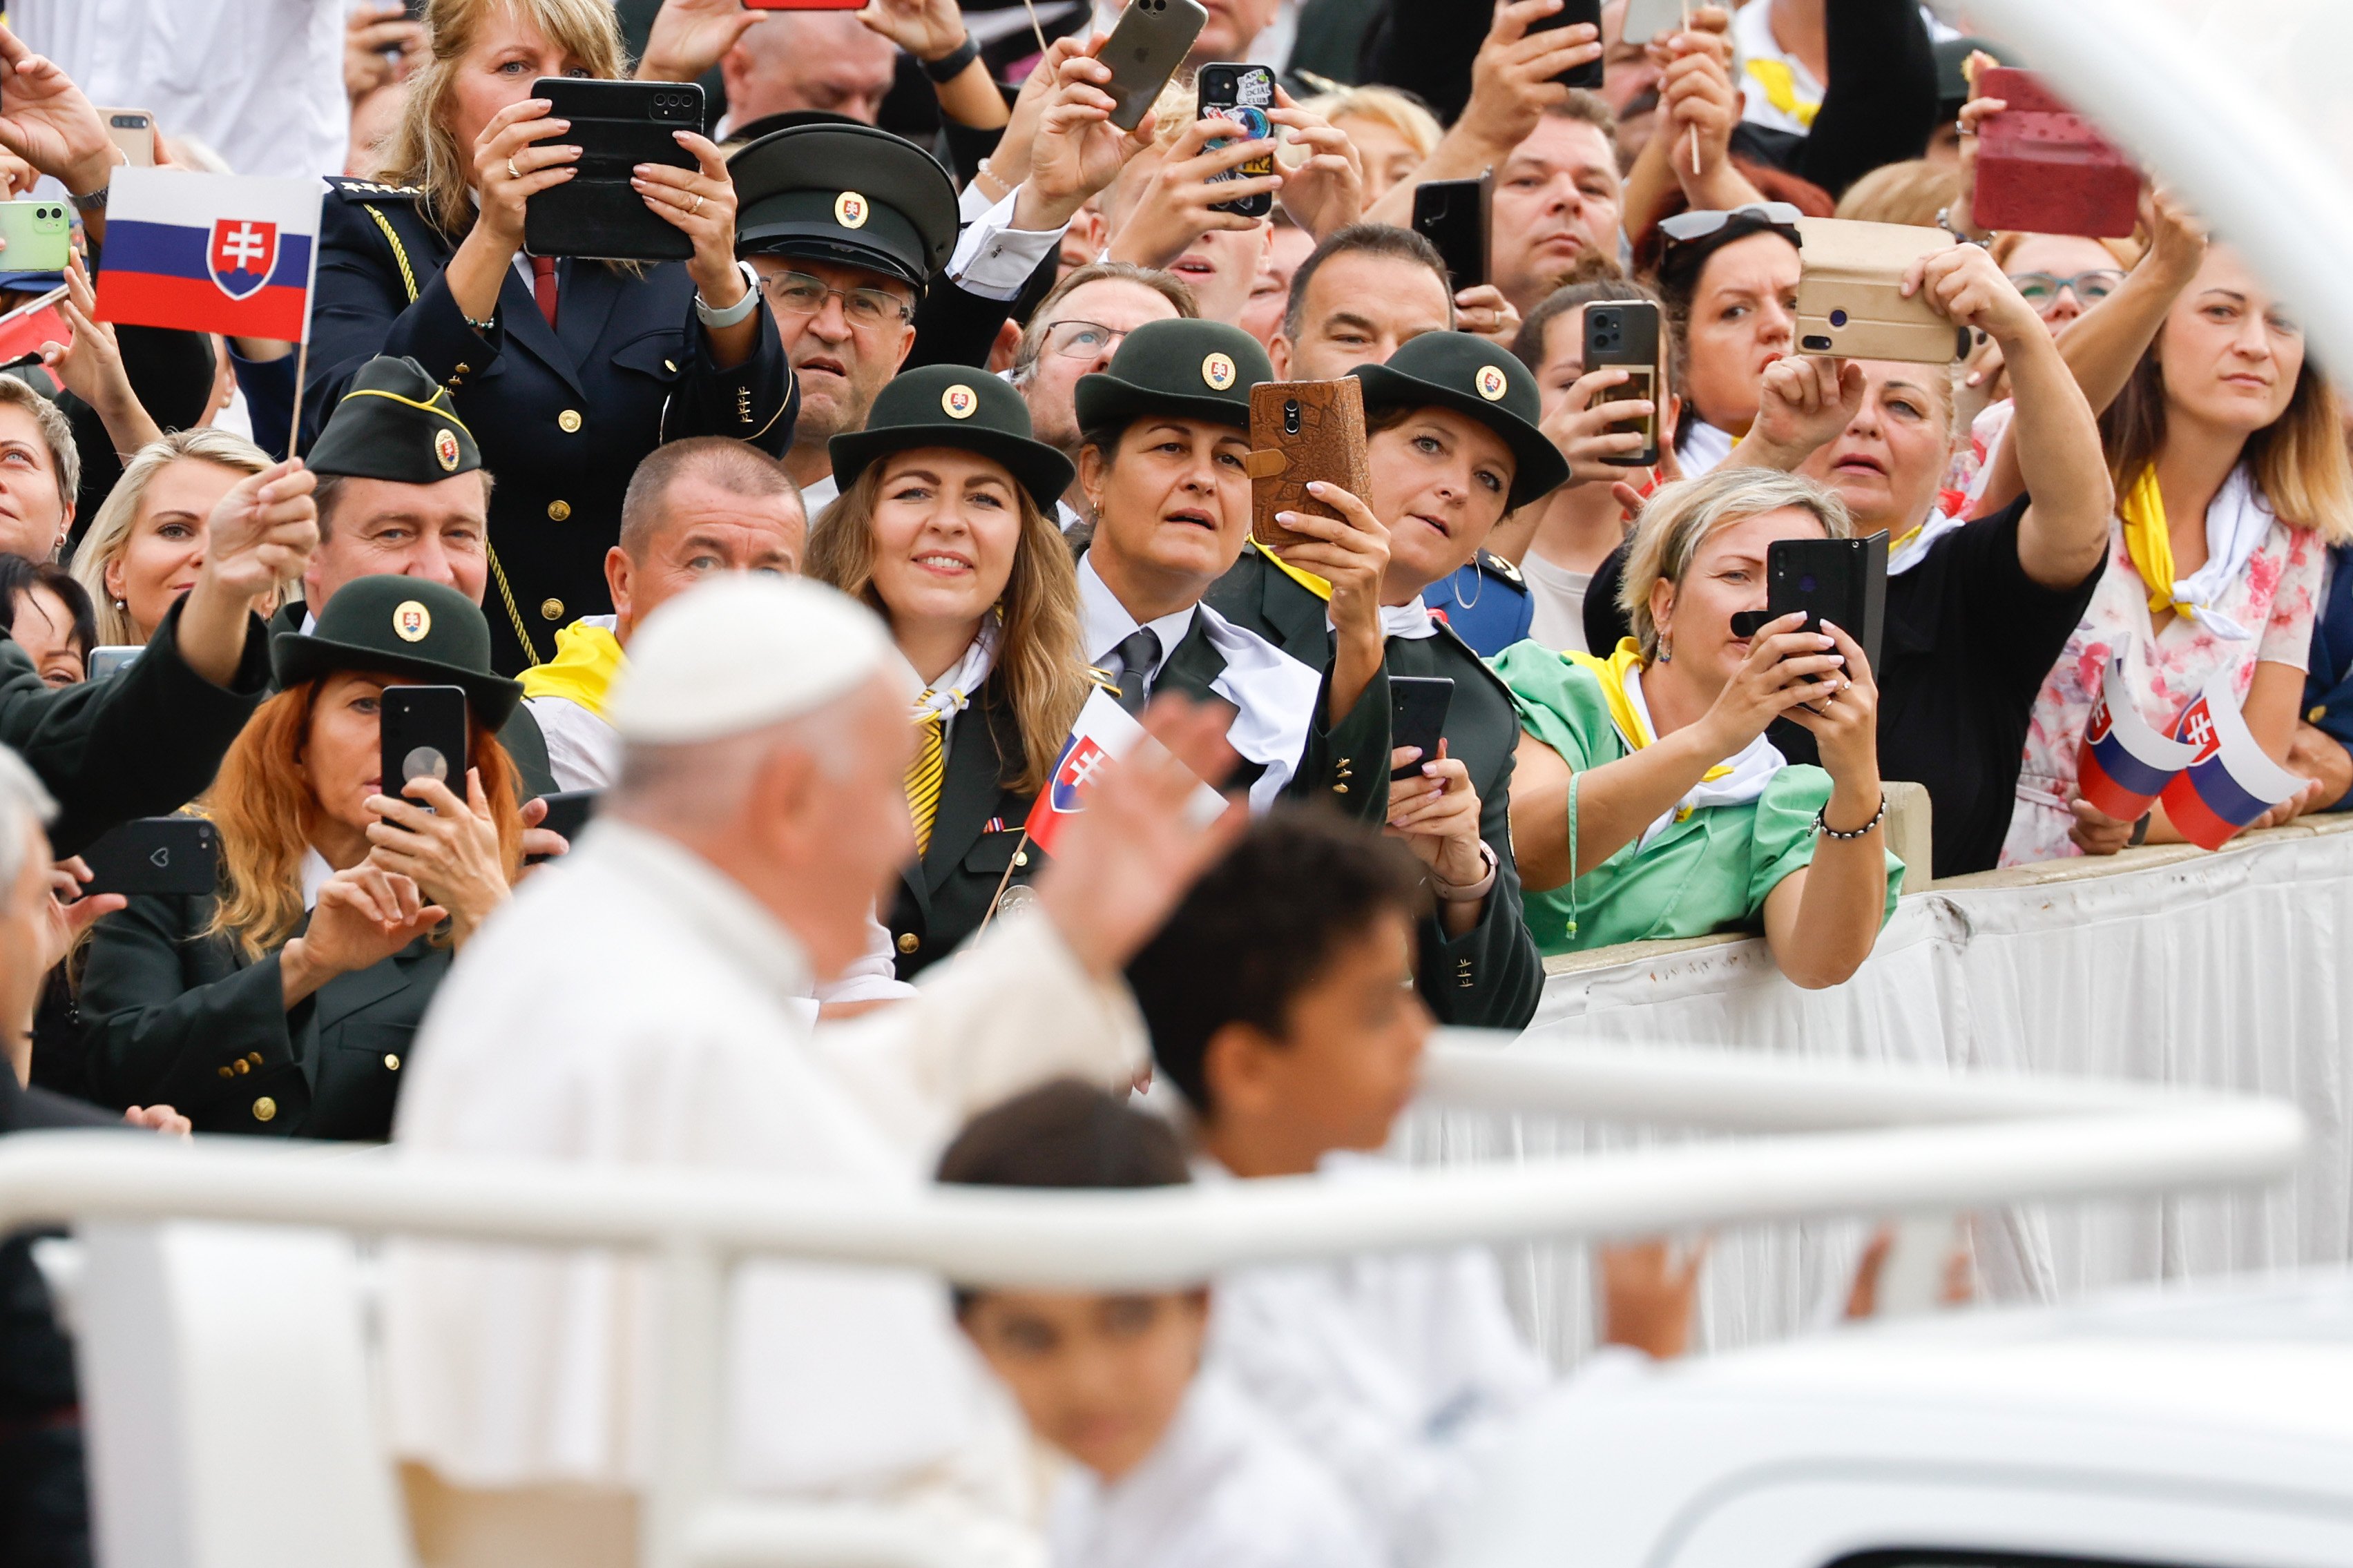 Pope Francis waves to visitors from the popemobile.